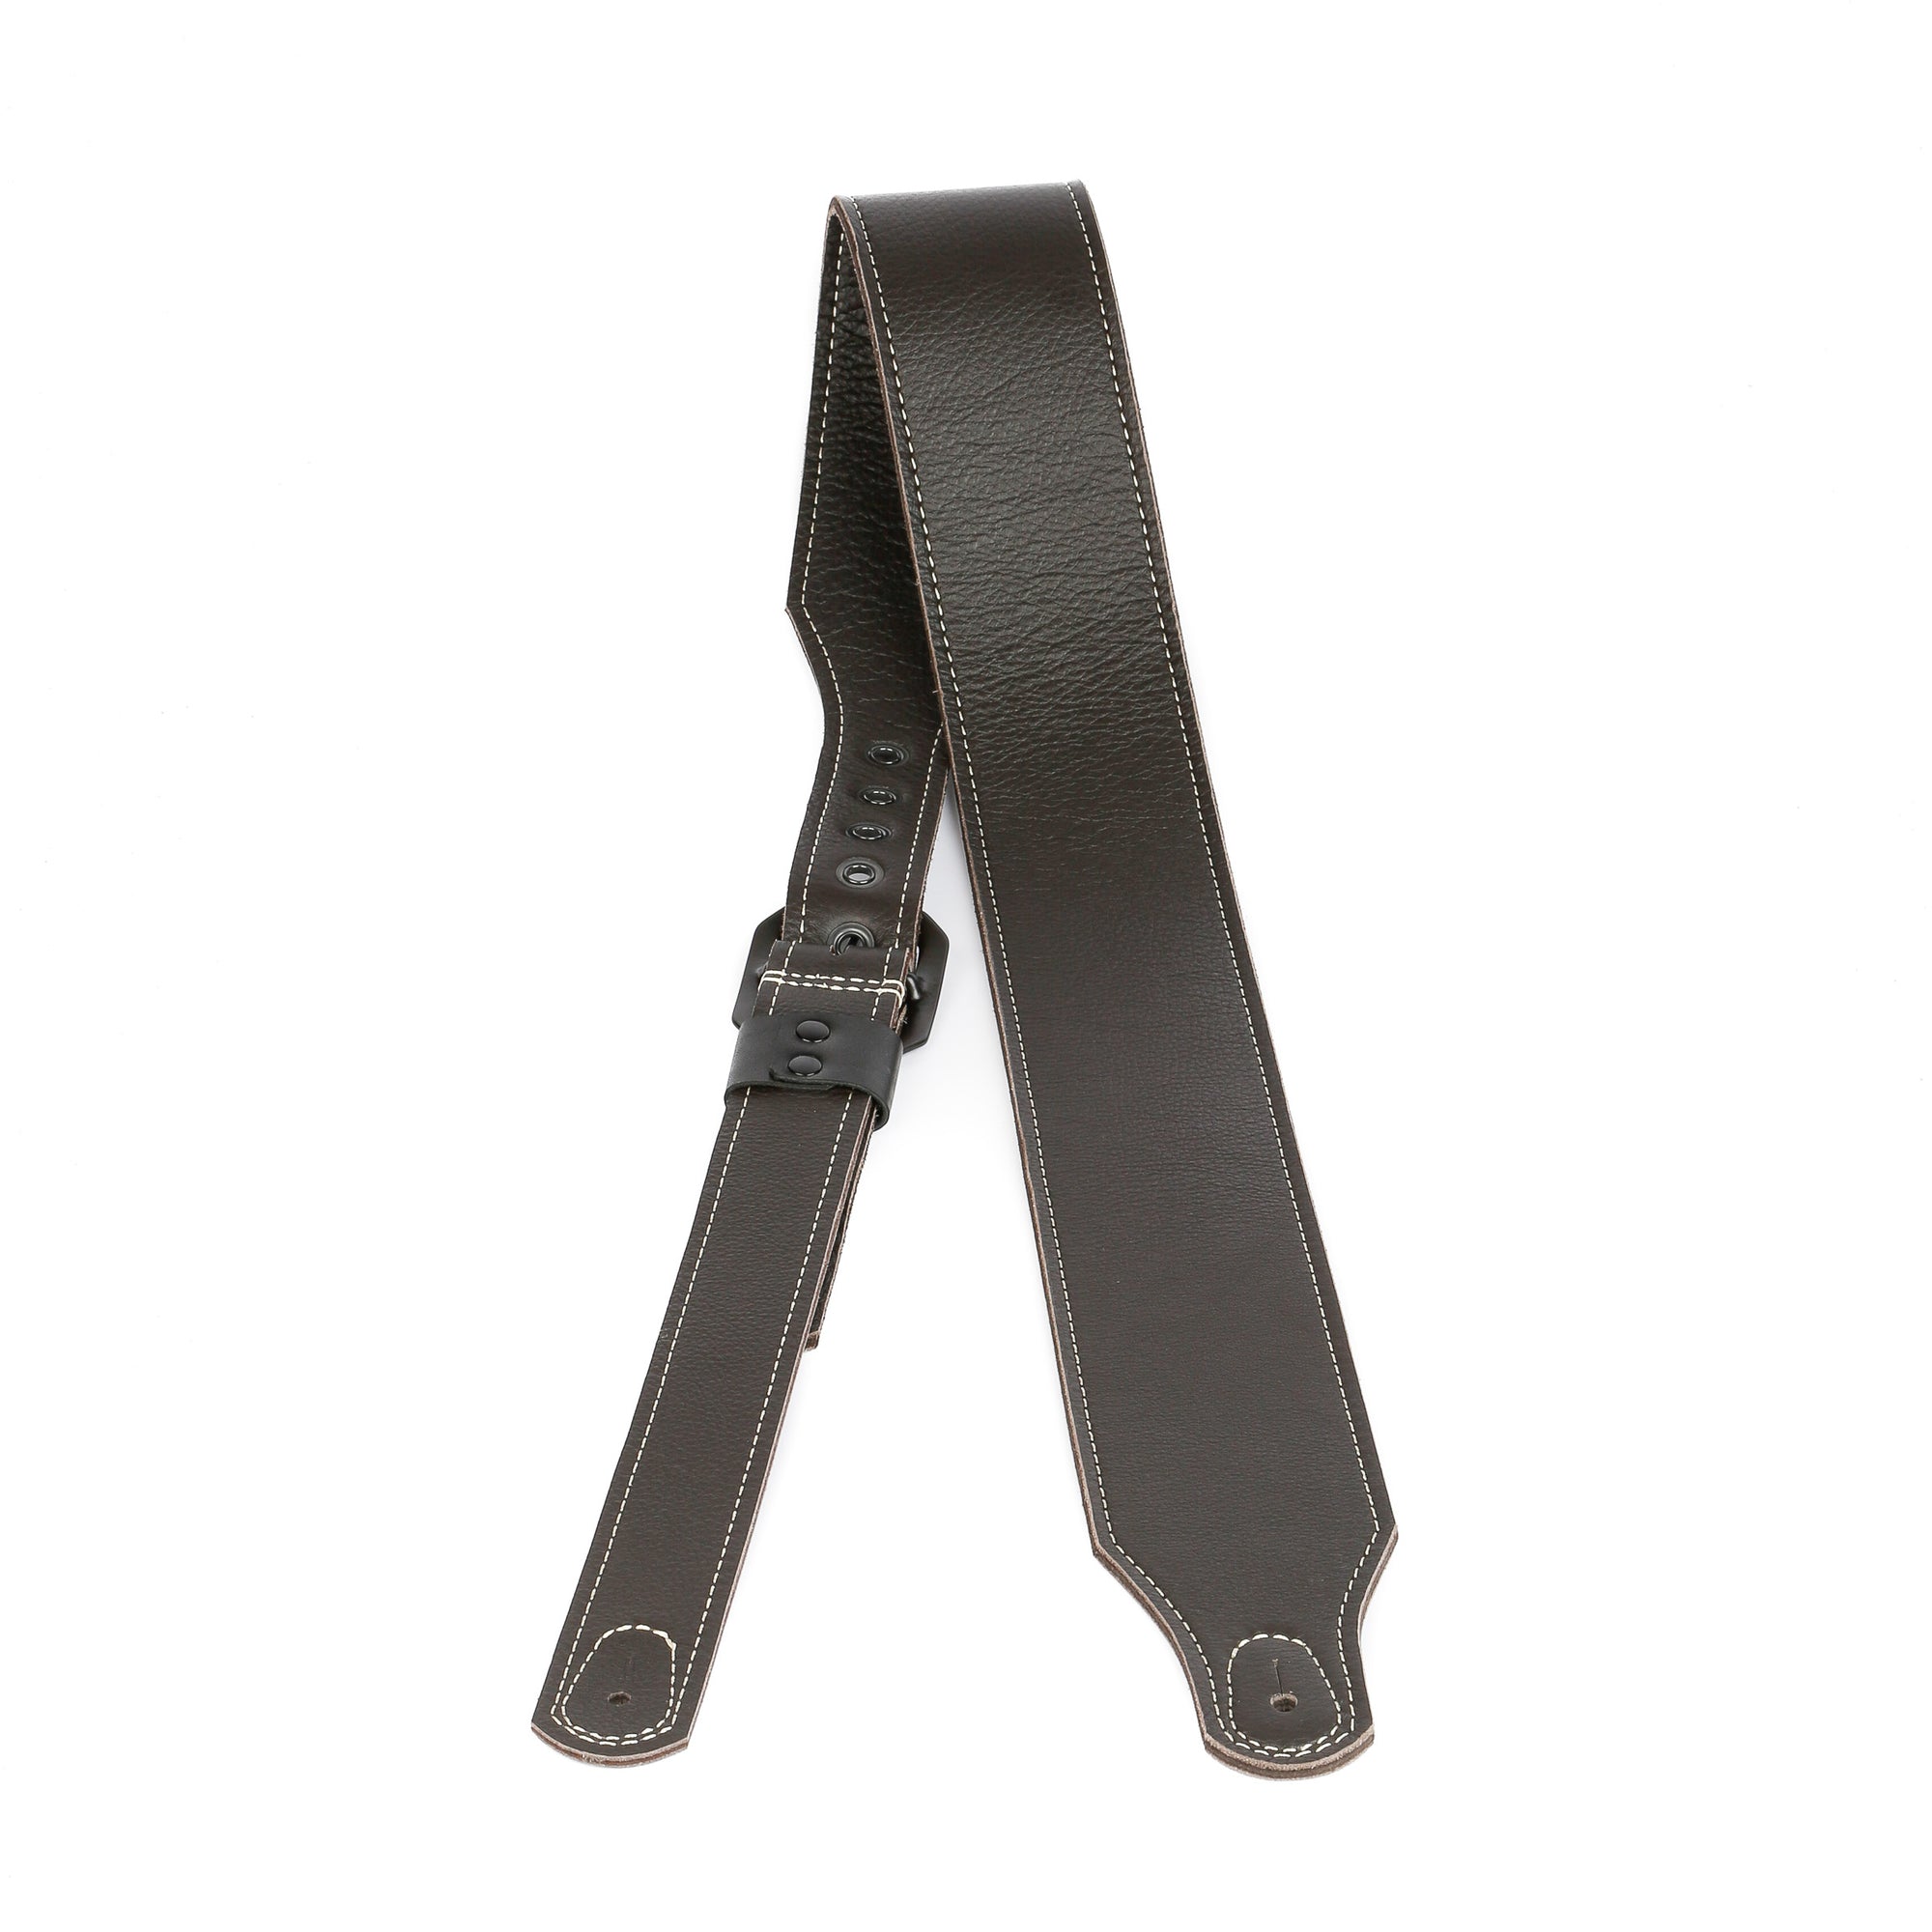 3" wide brown leather guitar strap top view with a black clipped corner buckle and grommets